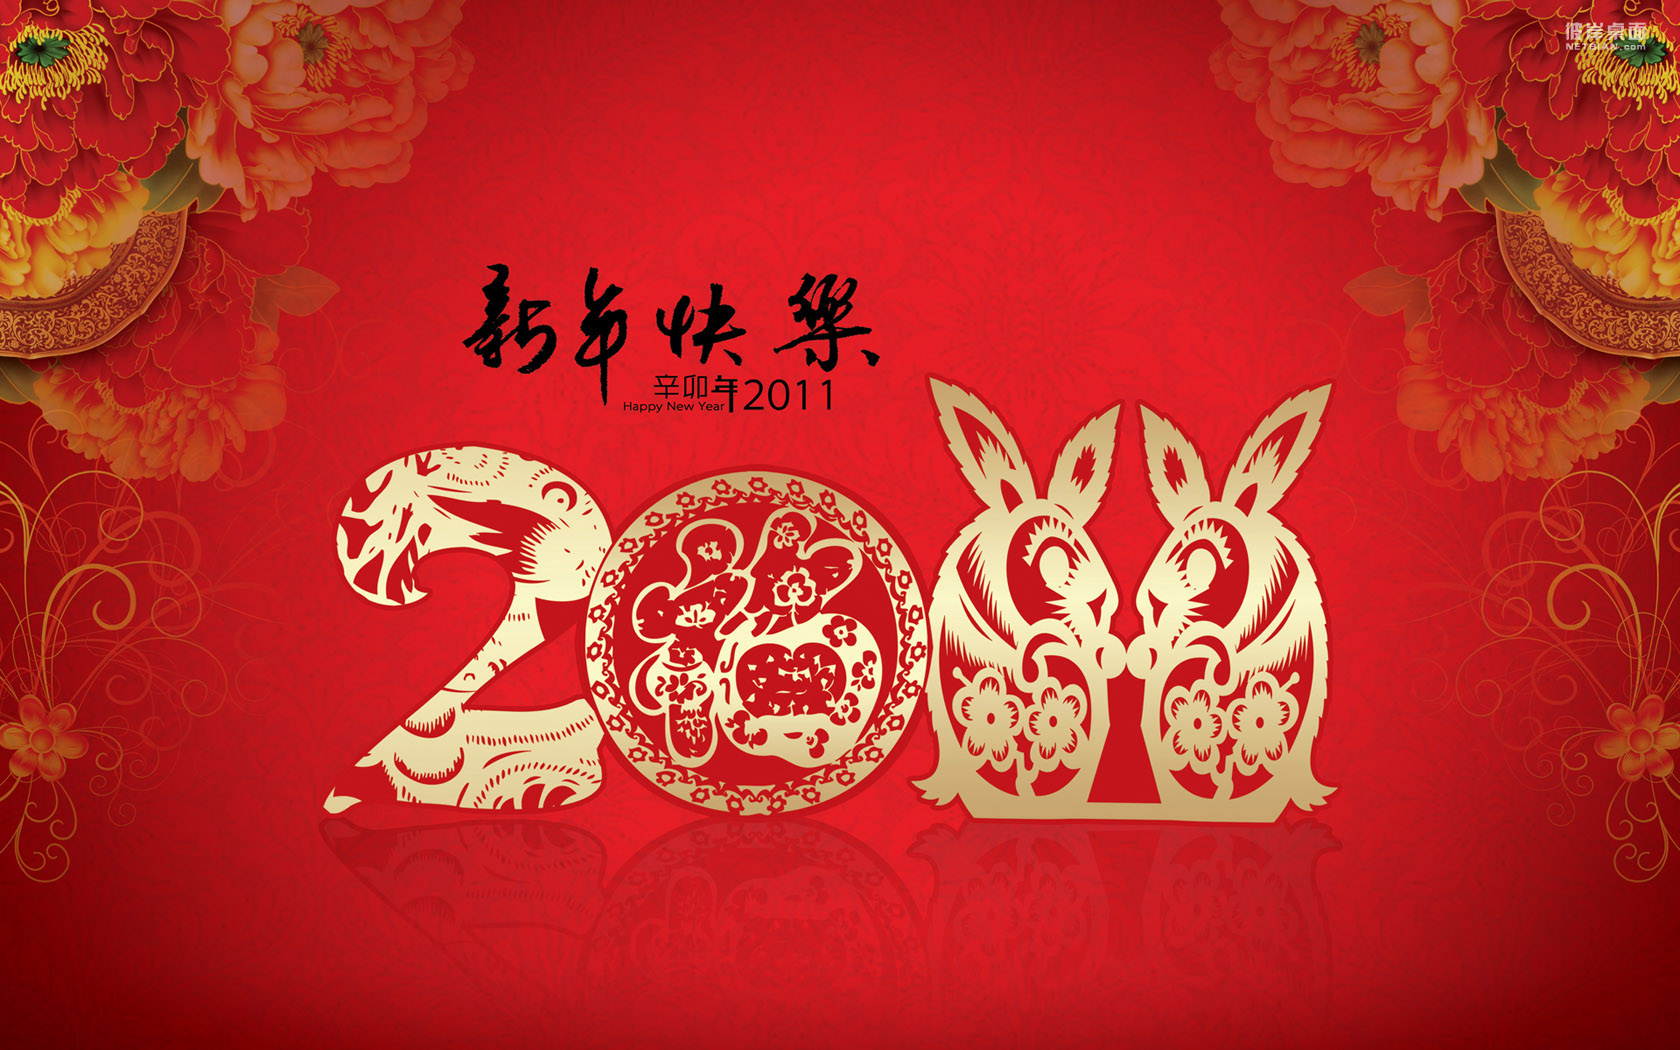 Happy New Year Wallpaper for the Year of the Rabbit